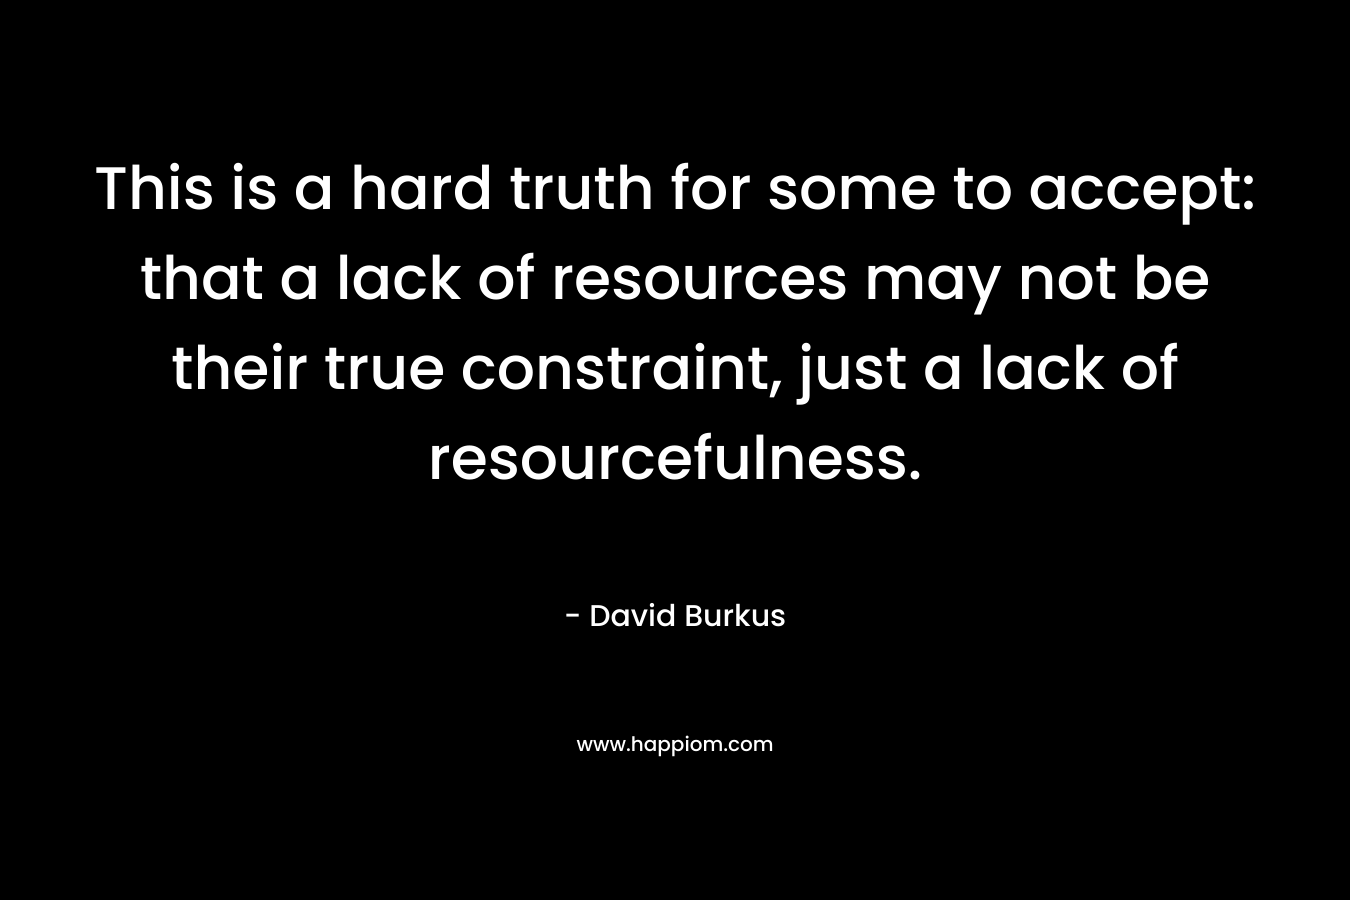 This is a hard truth for some to accept: that a lack of resources may not be their true constraint, just a lack of resourcefulness. – David Burkus